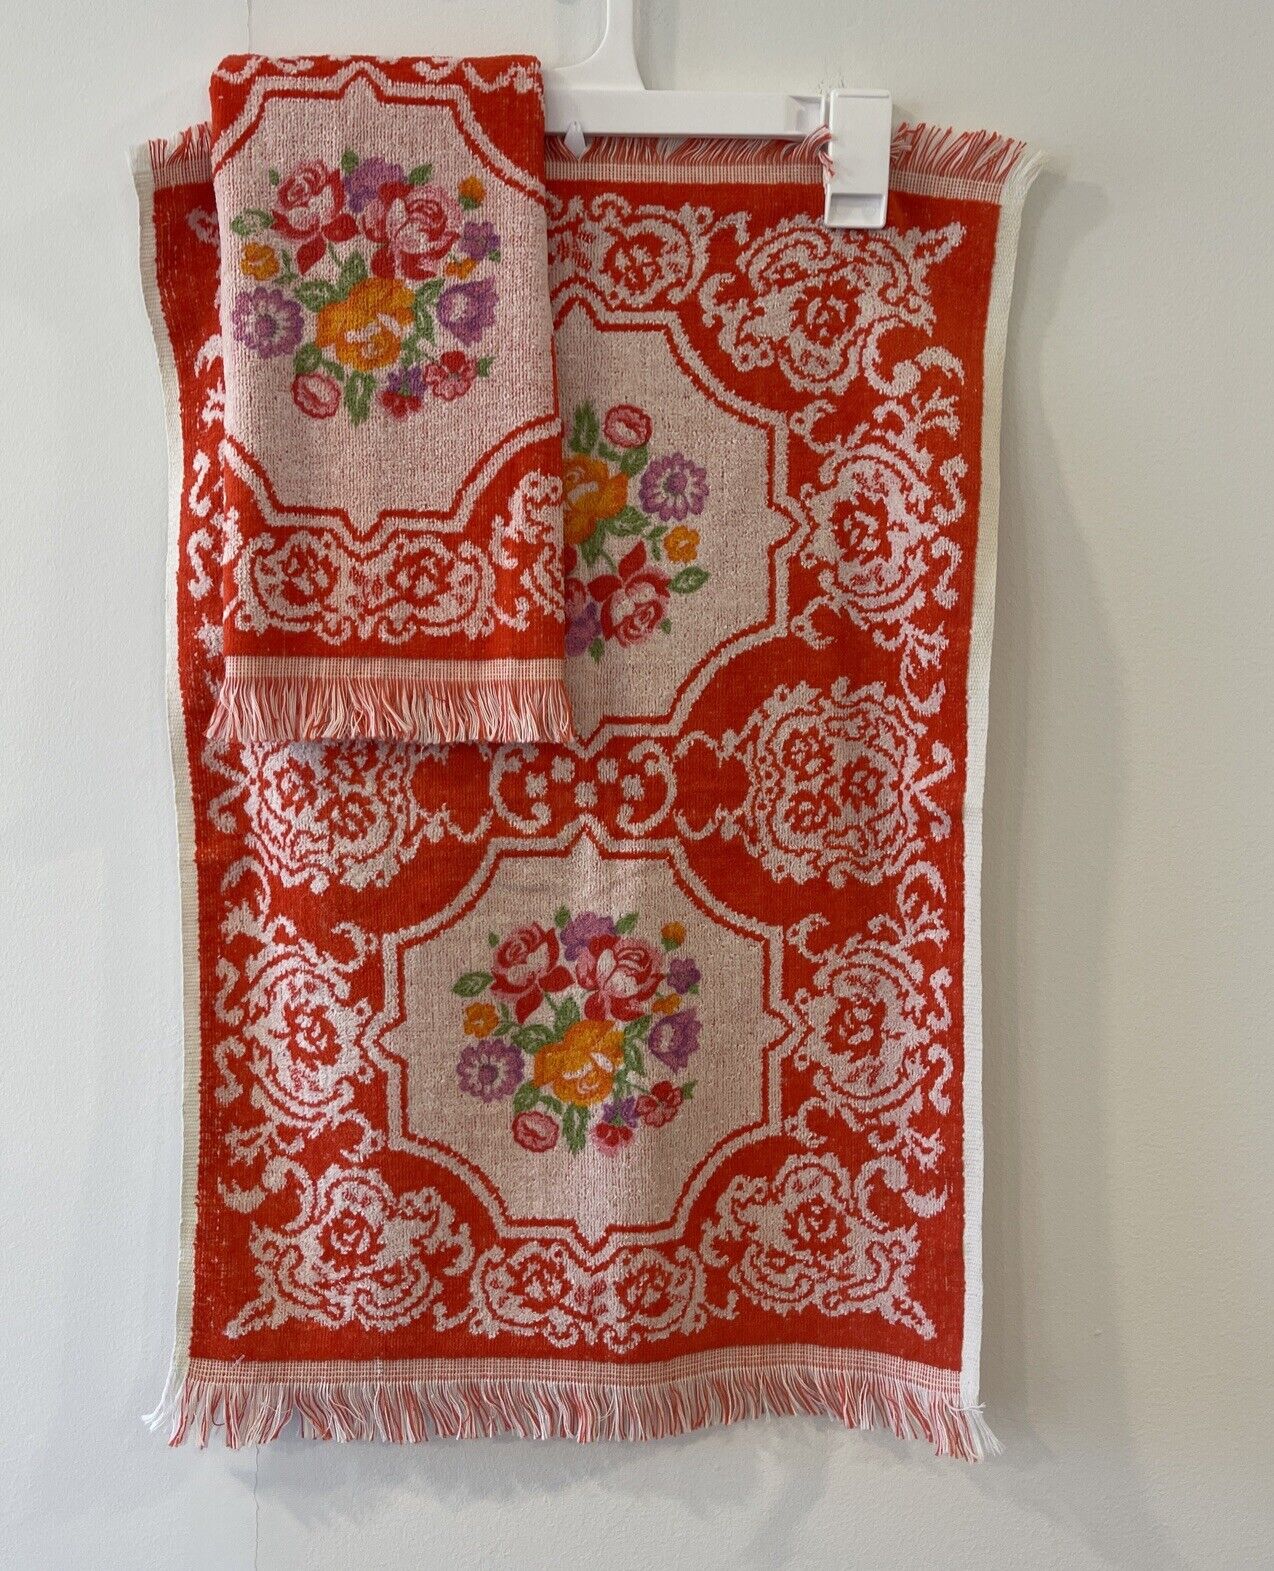 Vintage New Lady Pepperell Red Flower Power Towel Hand Towel Set NOS